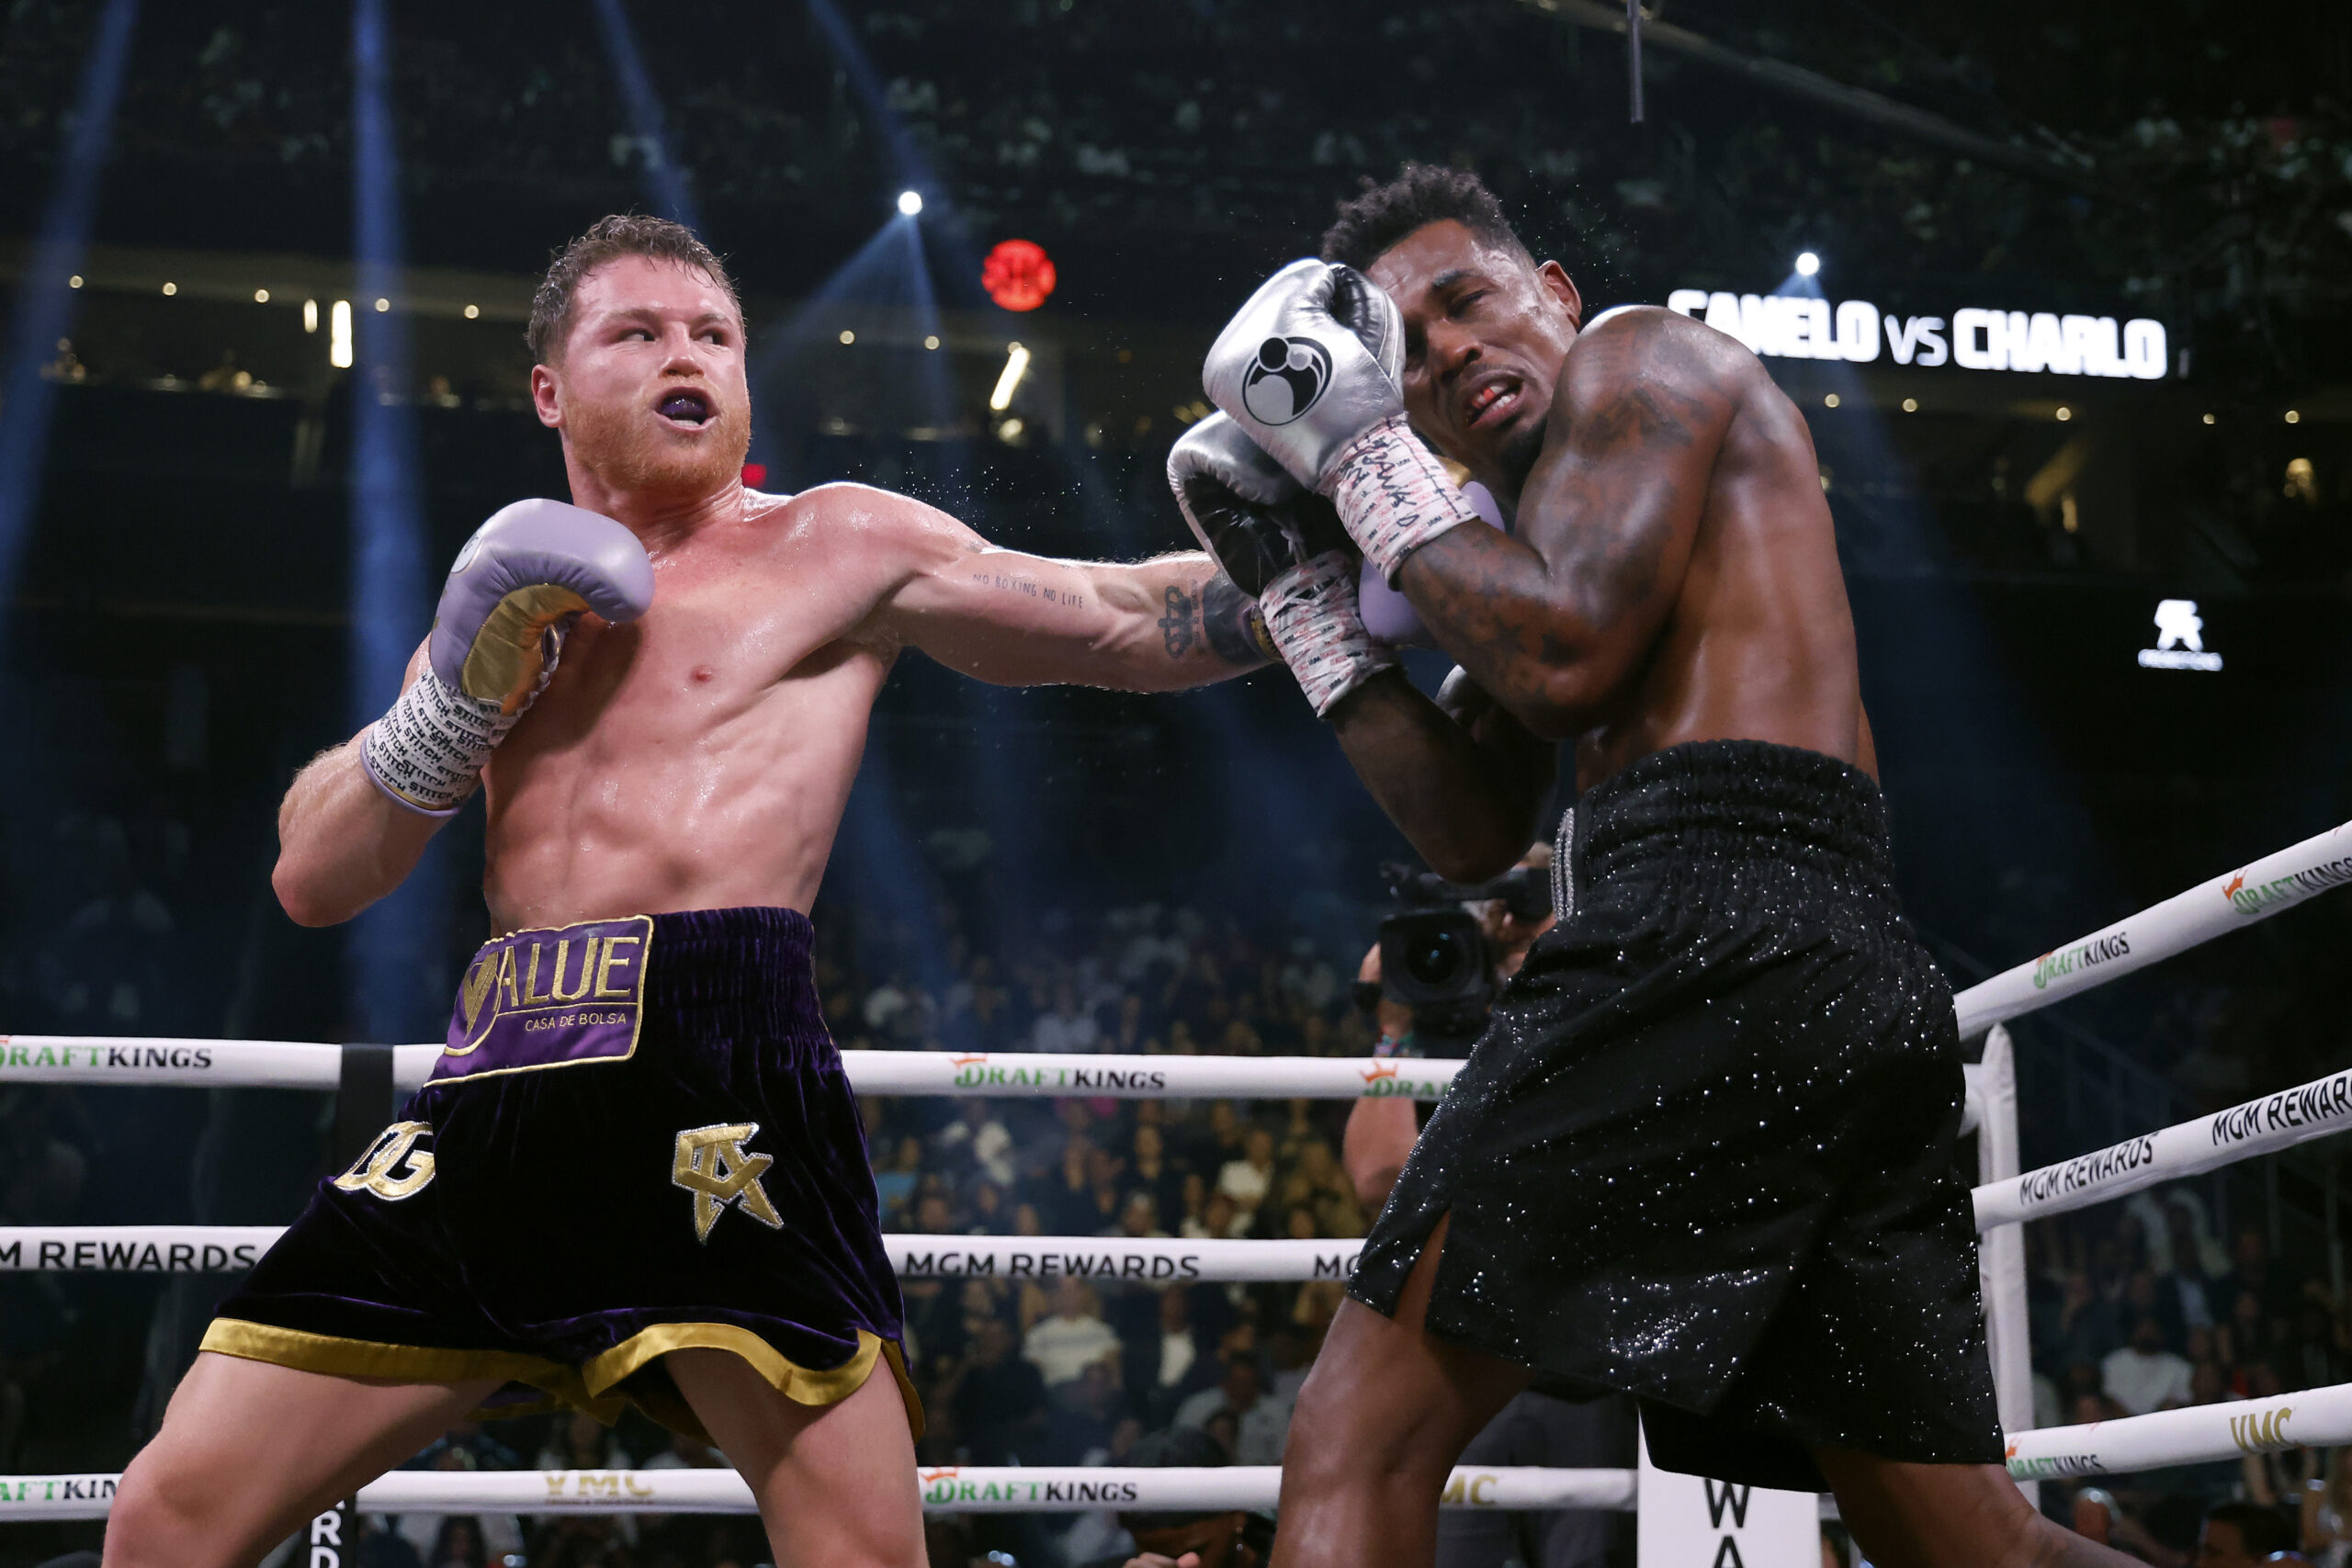 victory-60-has-arrived:-canelo-alvarez-expands-his-legacy-by-convincingly-defeating-jermell-charlo-by-unanimous-decision-[video]